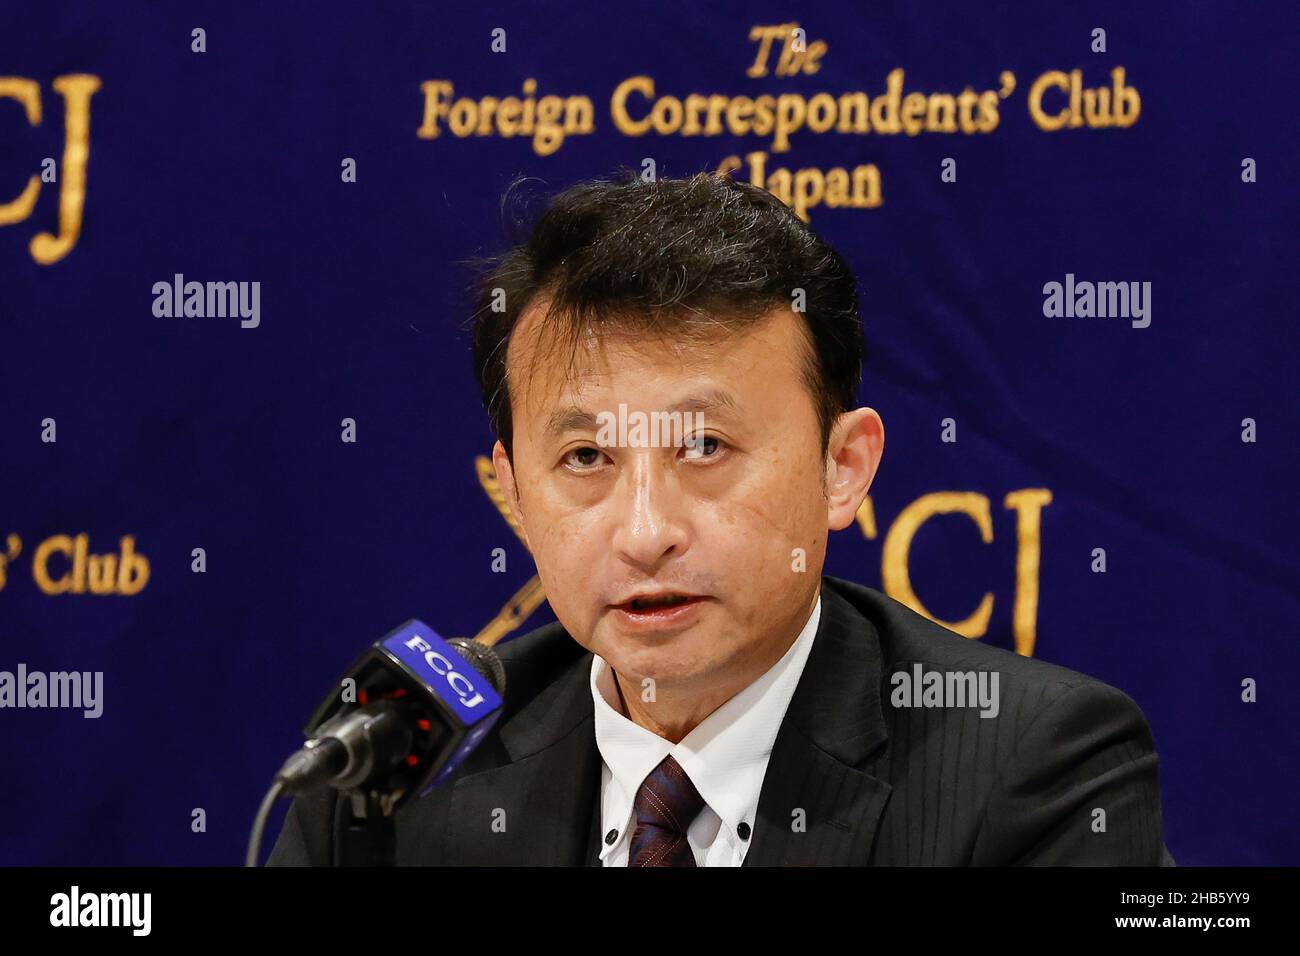 Tokyo, Japan. 17th Dec, 2021. Bonji Ohara, a senior fellow at the Sasakawa Peace Foundation, speaks during a news conference at The Foreign Correspondents' Club of Japan on December 17, 2021, Tokyo, Japan. Ohara spoke about the diplomatic relations between Japan and China and the consequences if Japan joins the US-led diplomatic boycott of the Beijing Winter Olympic Games over human rights abuses. Credit: Aflo Co. Ltd./Alamy Live News Stock Photo